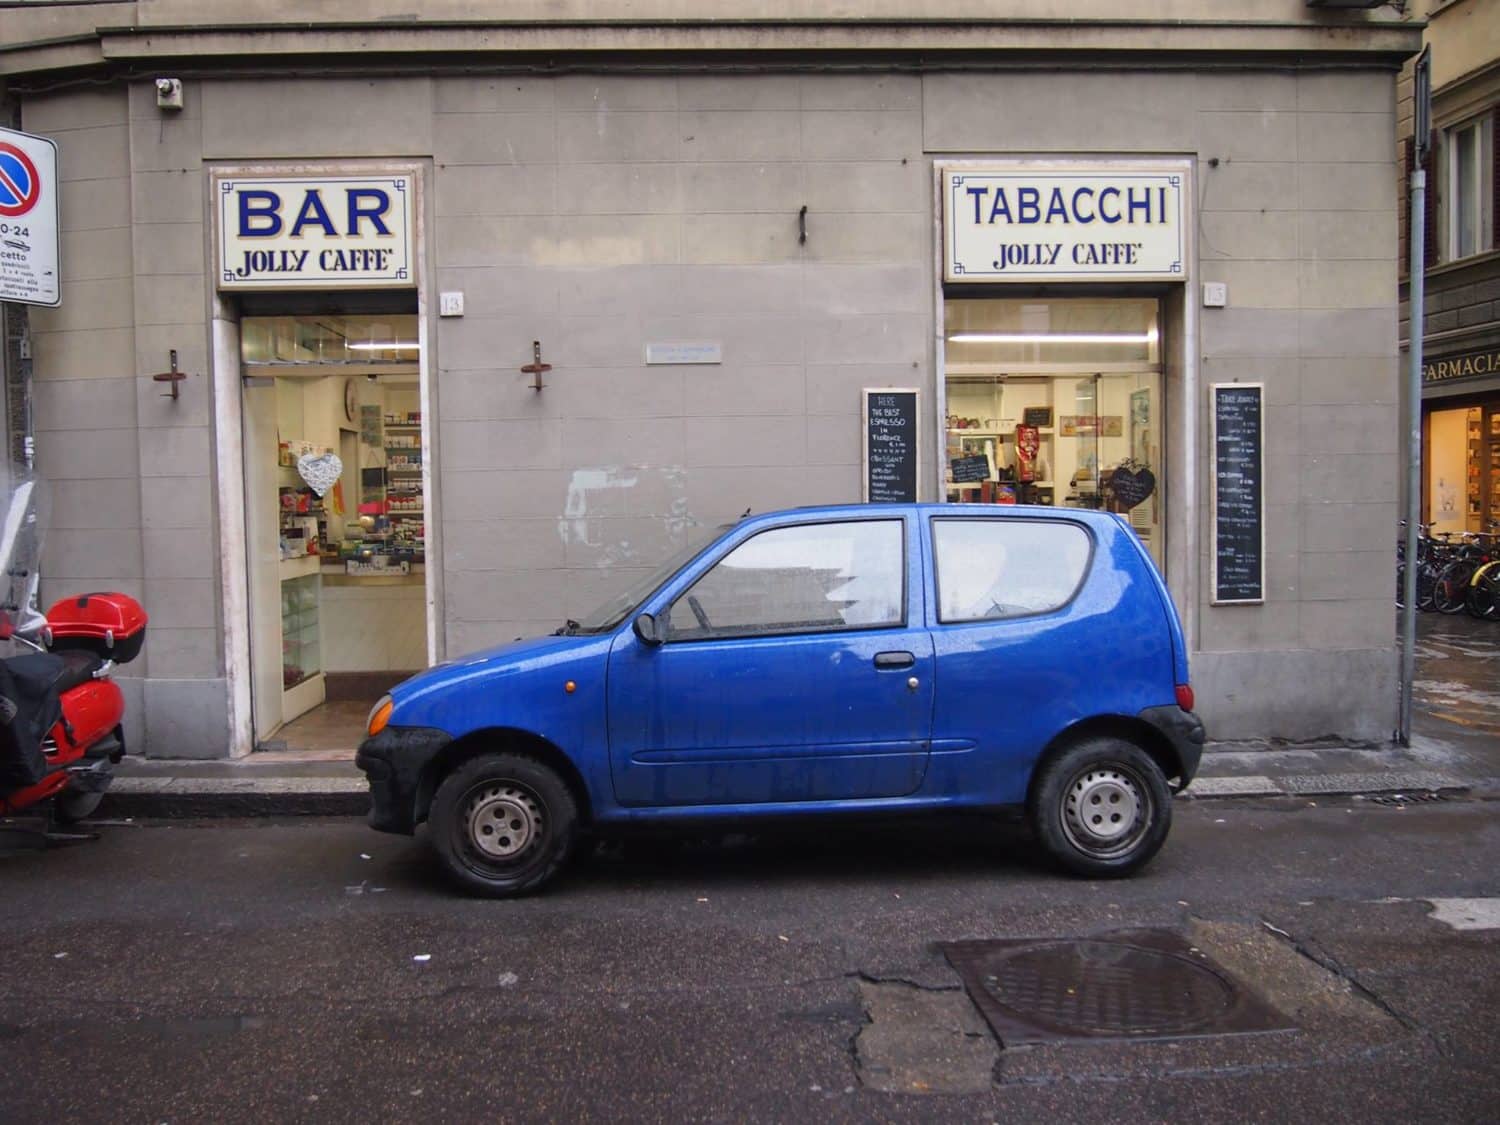 A car in the streets of Florence, Italy.